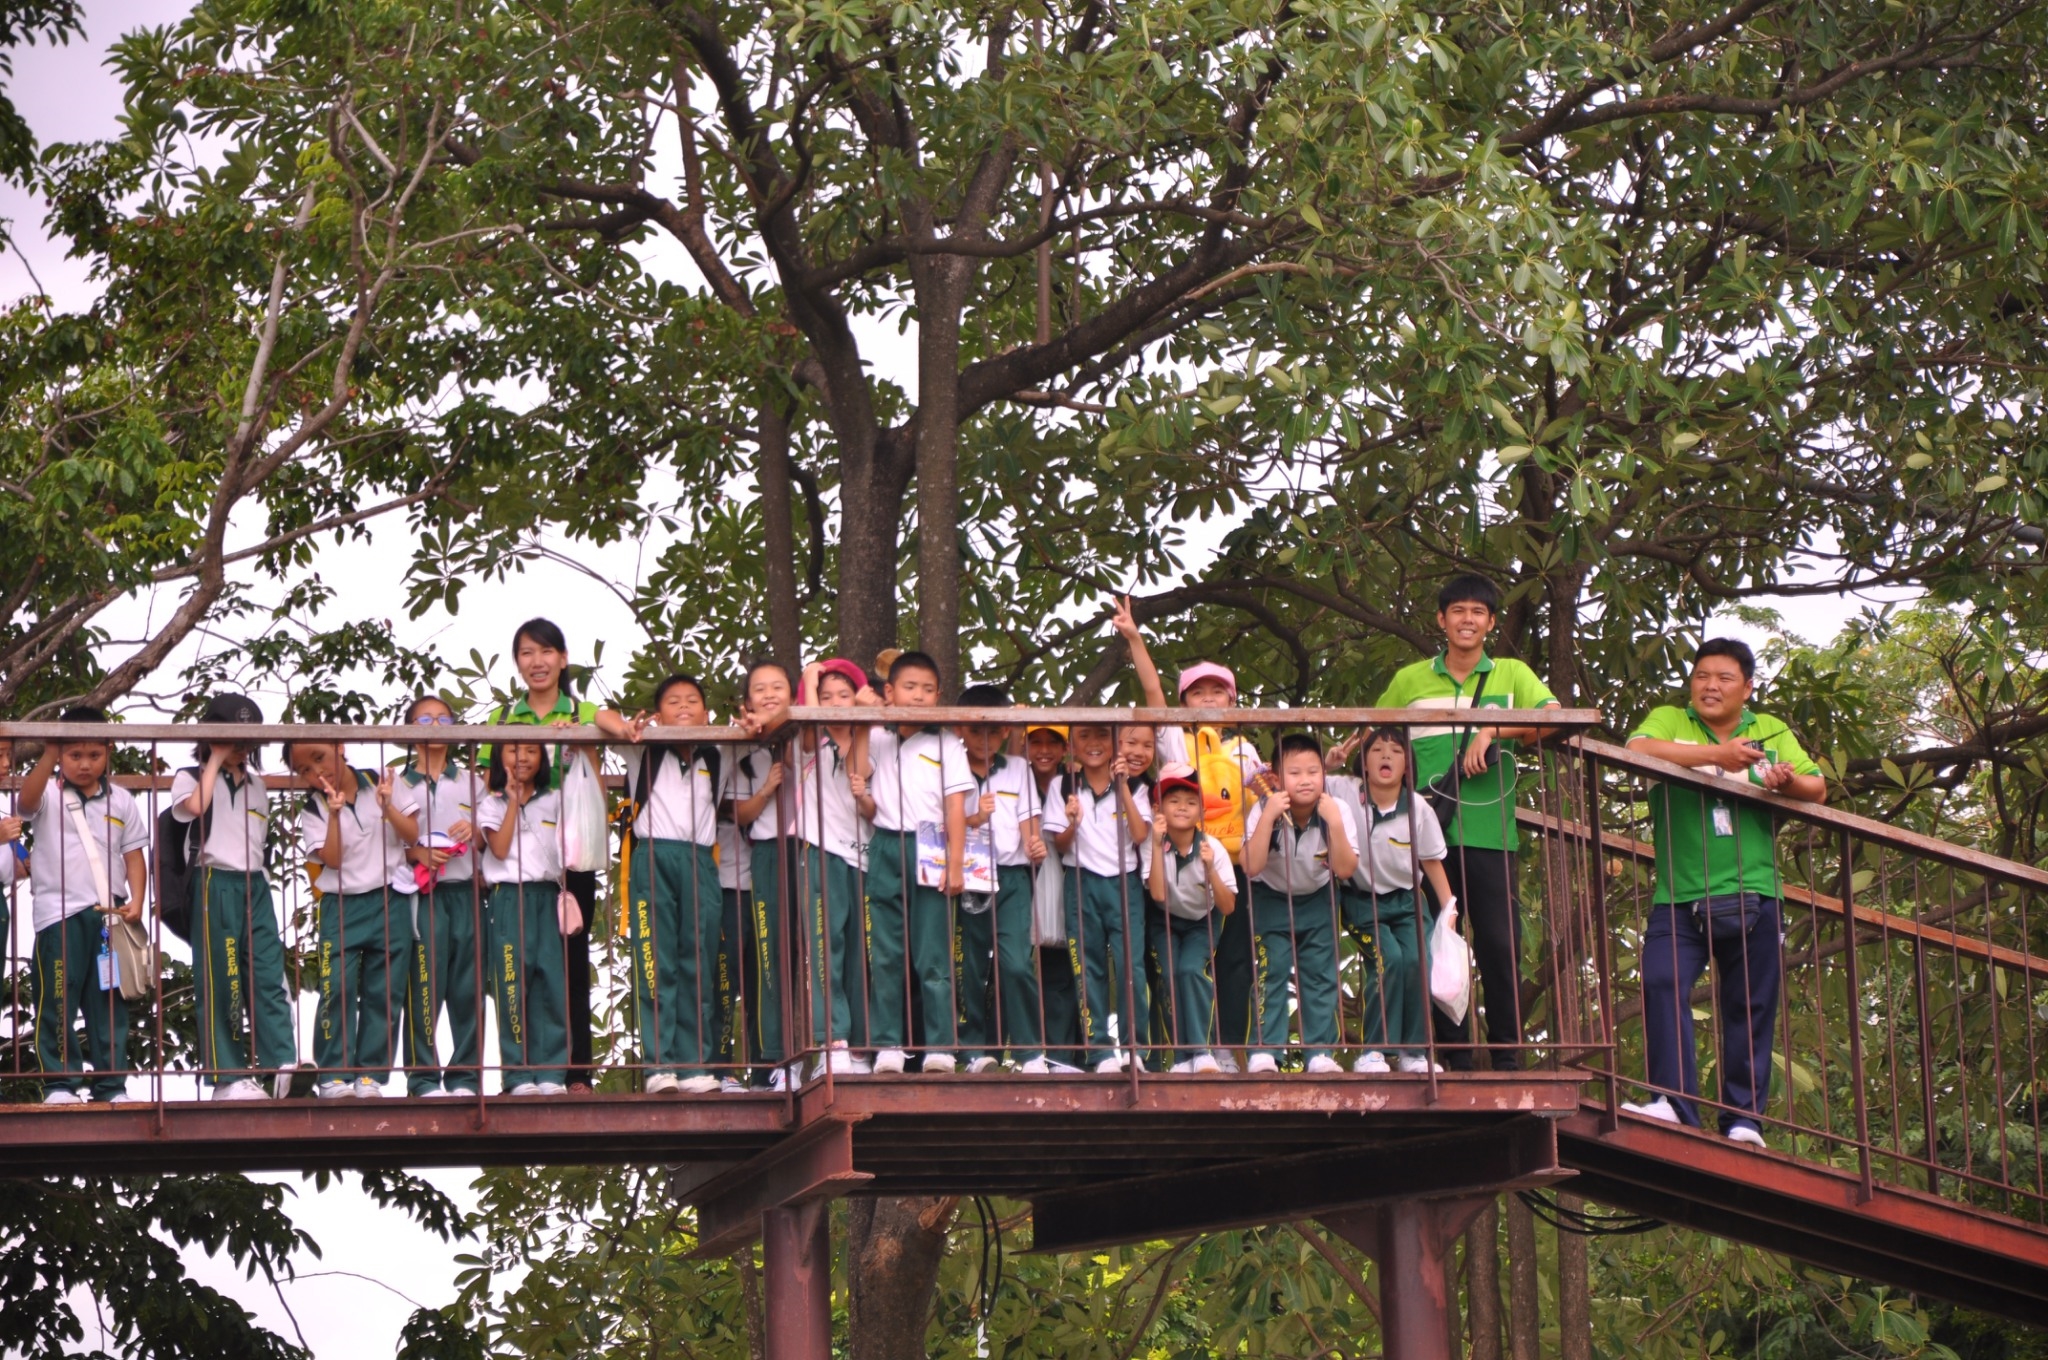 Thursday 22th of August 2019 At 07.30-16.00 : 143 third grade students and 14 teachers went on a field trip at The Golden jubilee Museum of Agriculture Office, Pathumthani Province